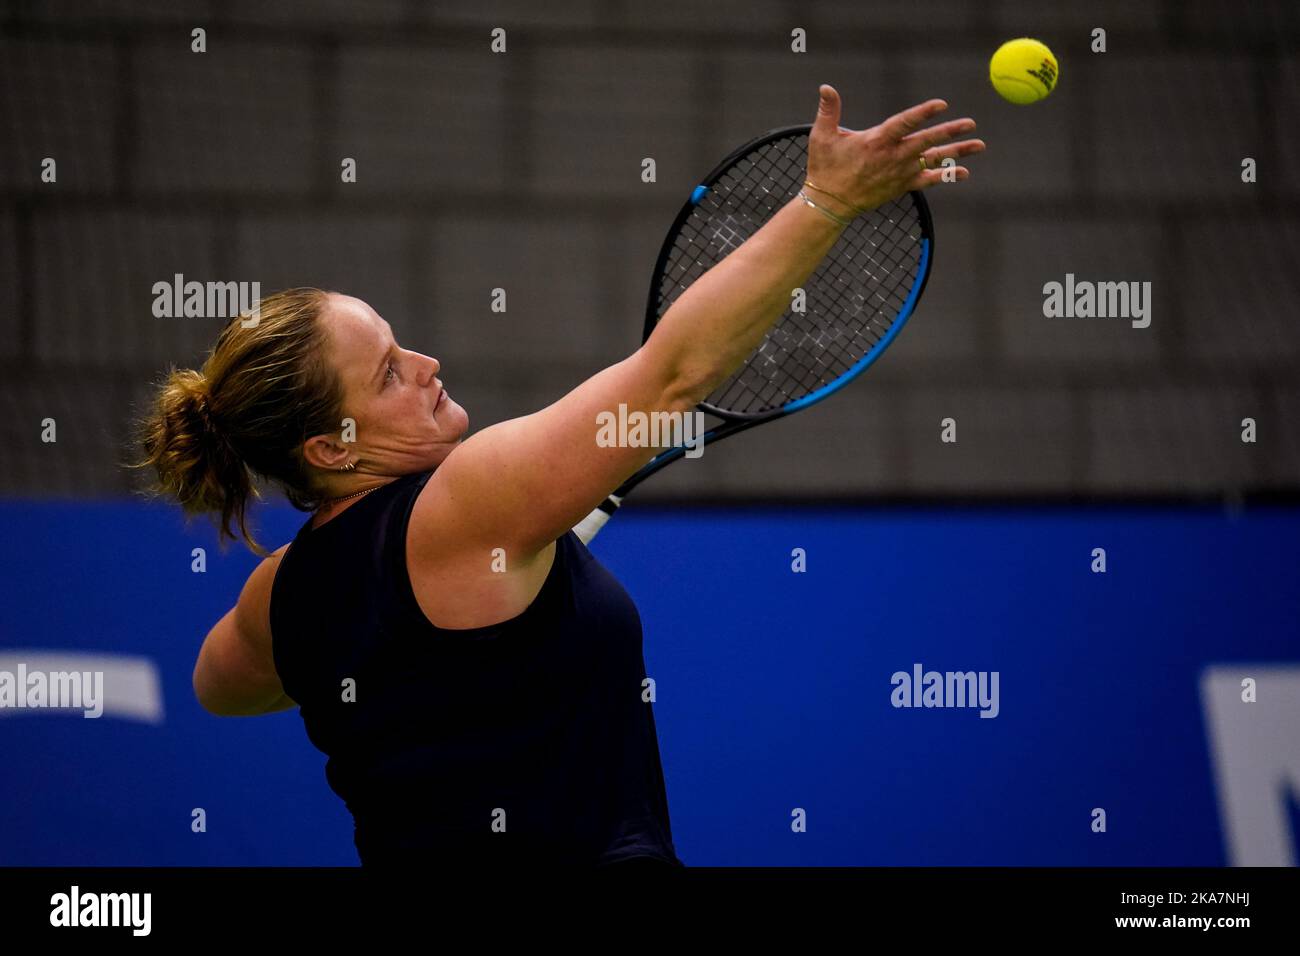 OSS, NETHERLANDS - NOVEMBER 1: Aniek van Koot of the Netherlands servers against Lucy Shuker of Great Britain during Day 3 of the 2022 ITF Wheelchair Tennis Masters at Sportcentrum de Rusheuvel on November 1, 2022 in Oss, Netherlands (Photo by Rene Nijhuis/Orange Pictures) Stock Photo